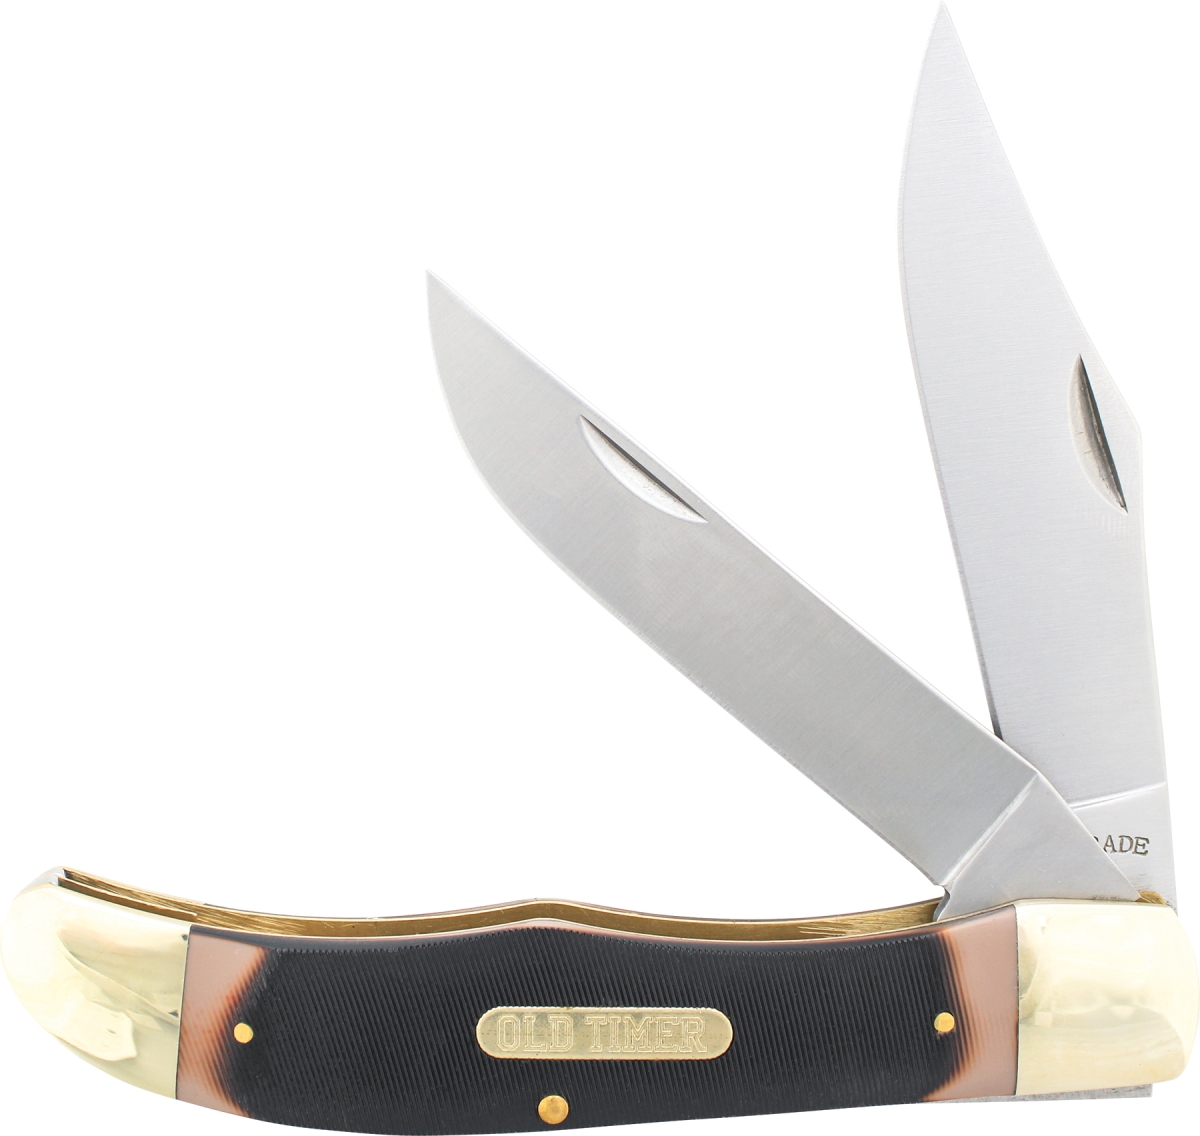 Picture of BTI Tools SCH-25OT 2019 5.25 in. Schrade Old Timer Folding Hunter 2 Bladed Knife with Leather Sheath